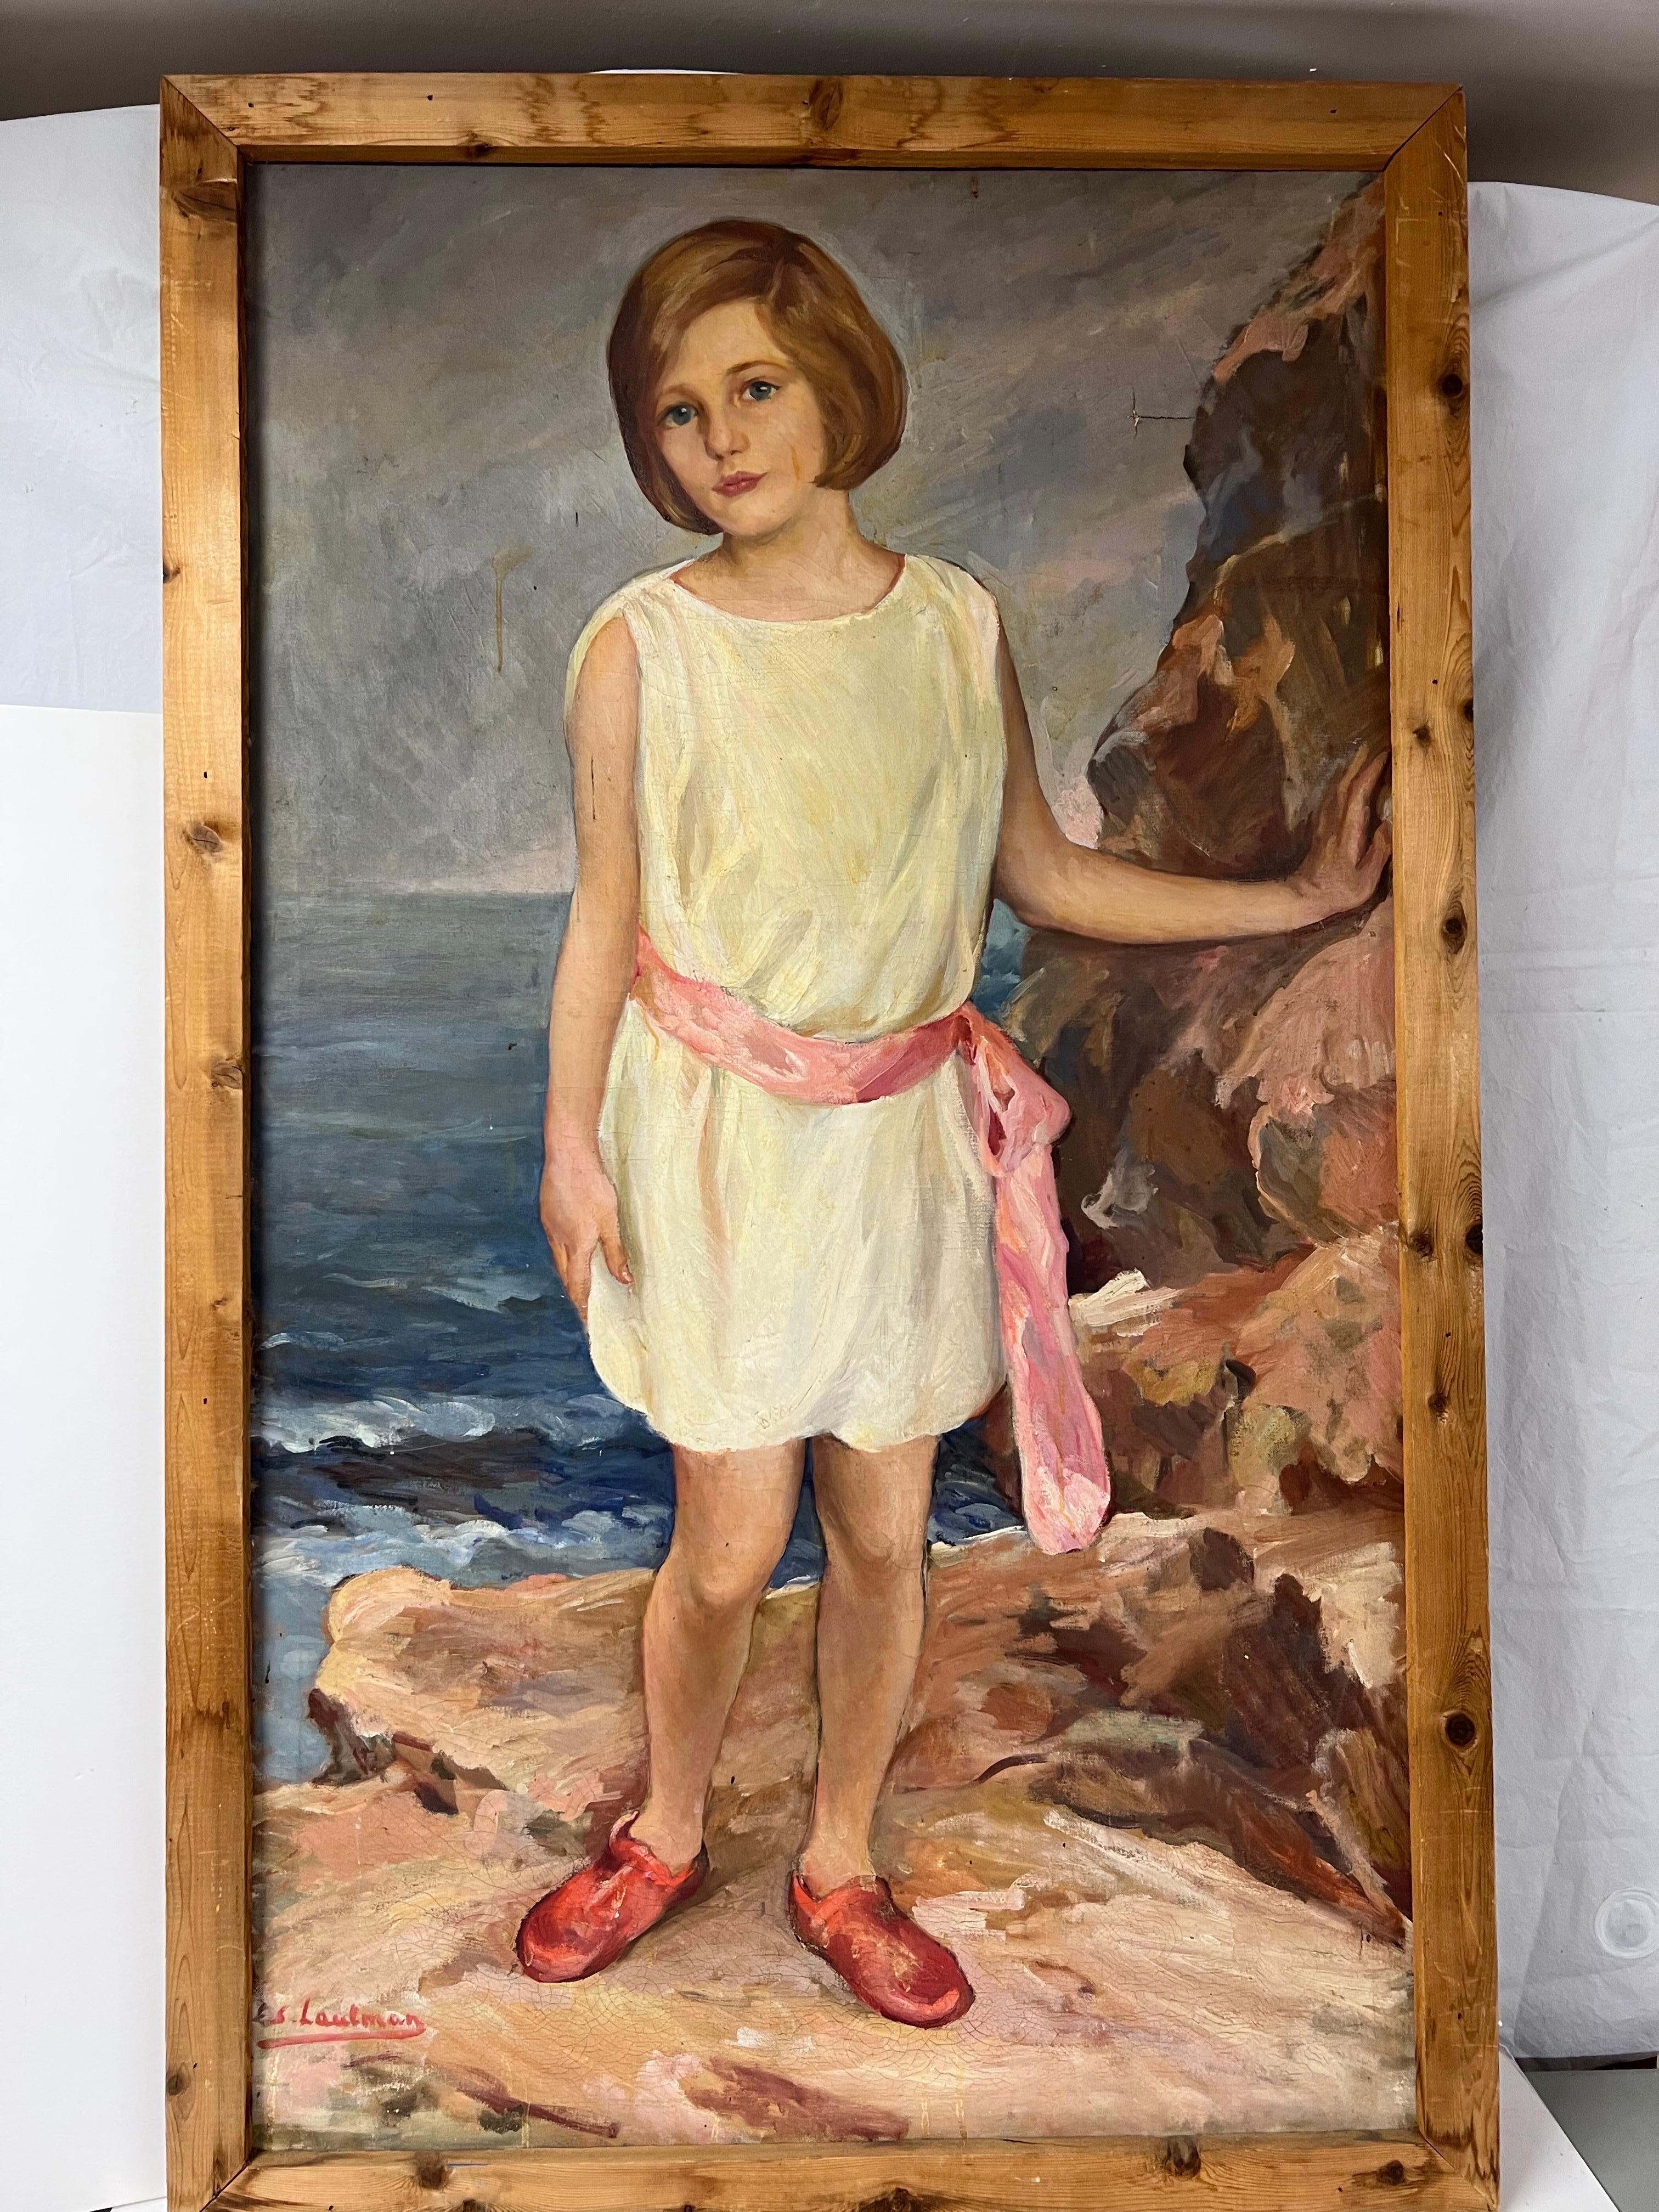 Life-size Painting of Girl by the Sea. Signed illegibly by E.S Laufman?
Beautiful composition of a young girl standiong oceanside. Romantically captured with her soft pink lips andmatching sash as she leans on the waters edge boulders. Innocence and